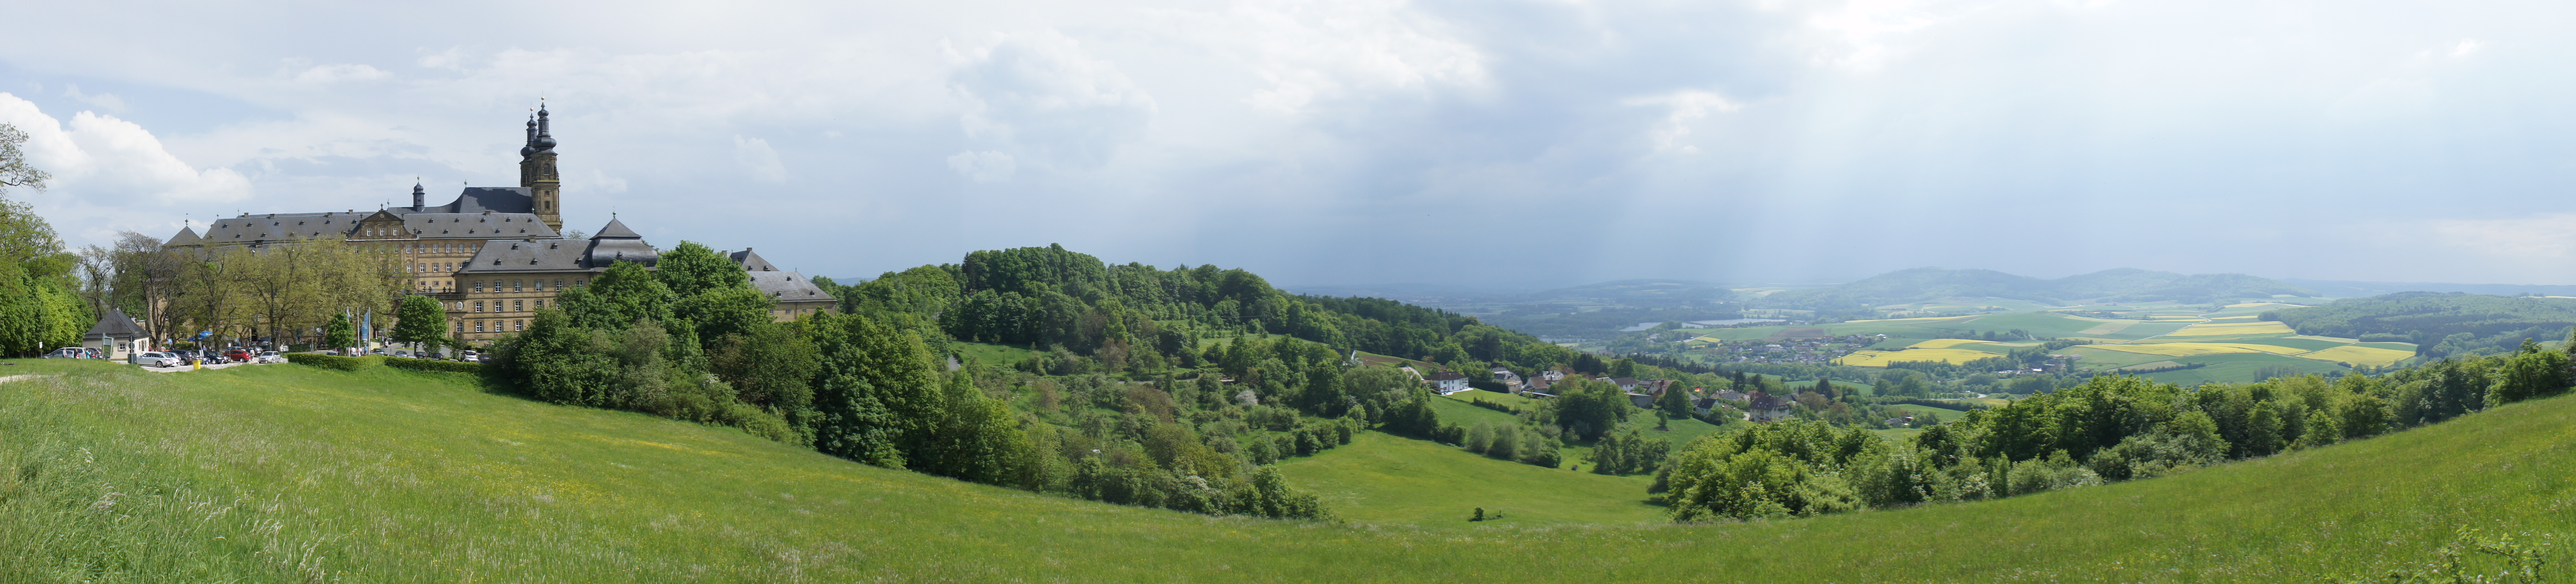 Panorama of mountains, a town, and fields far into the distance